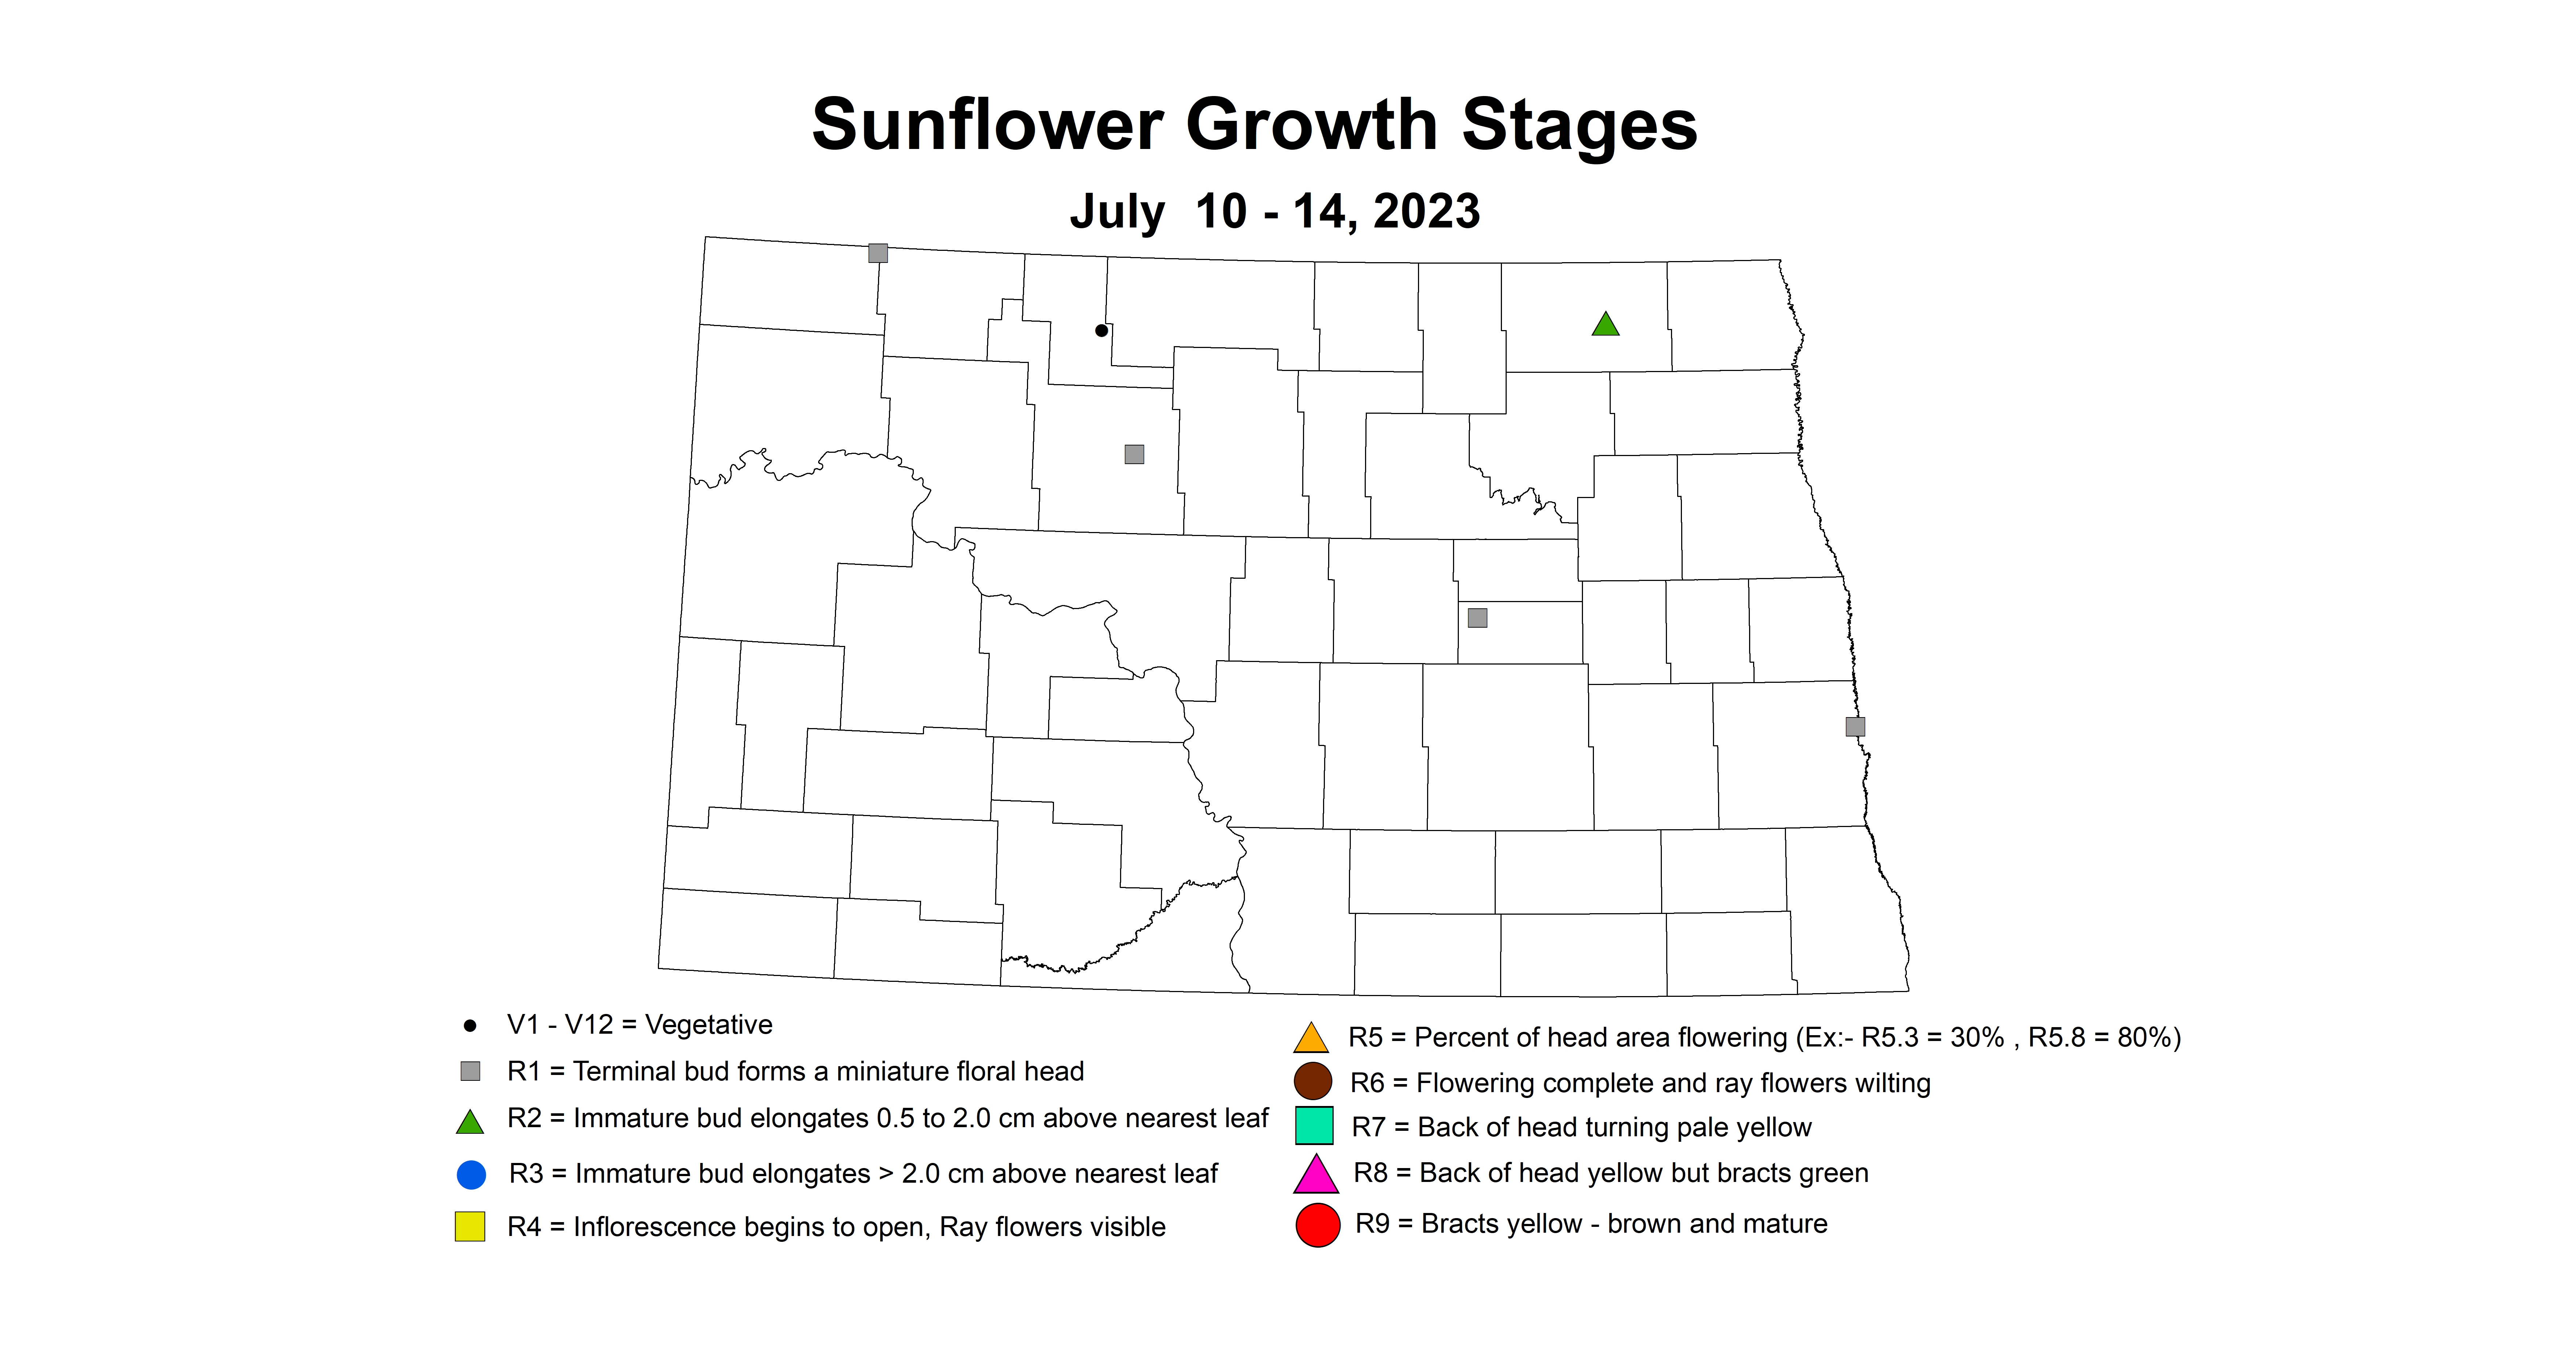 sunflower insect trap growth stages July 10-14 2023